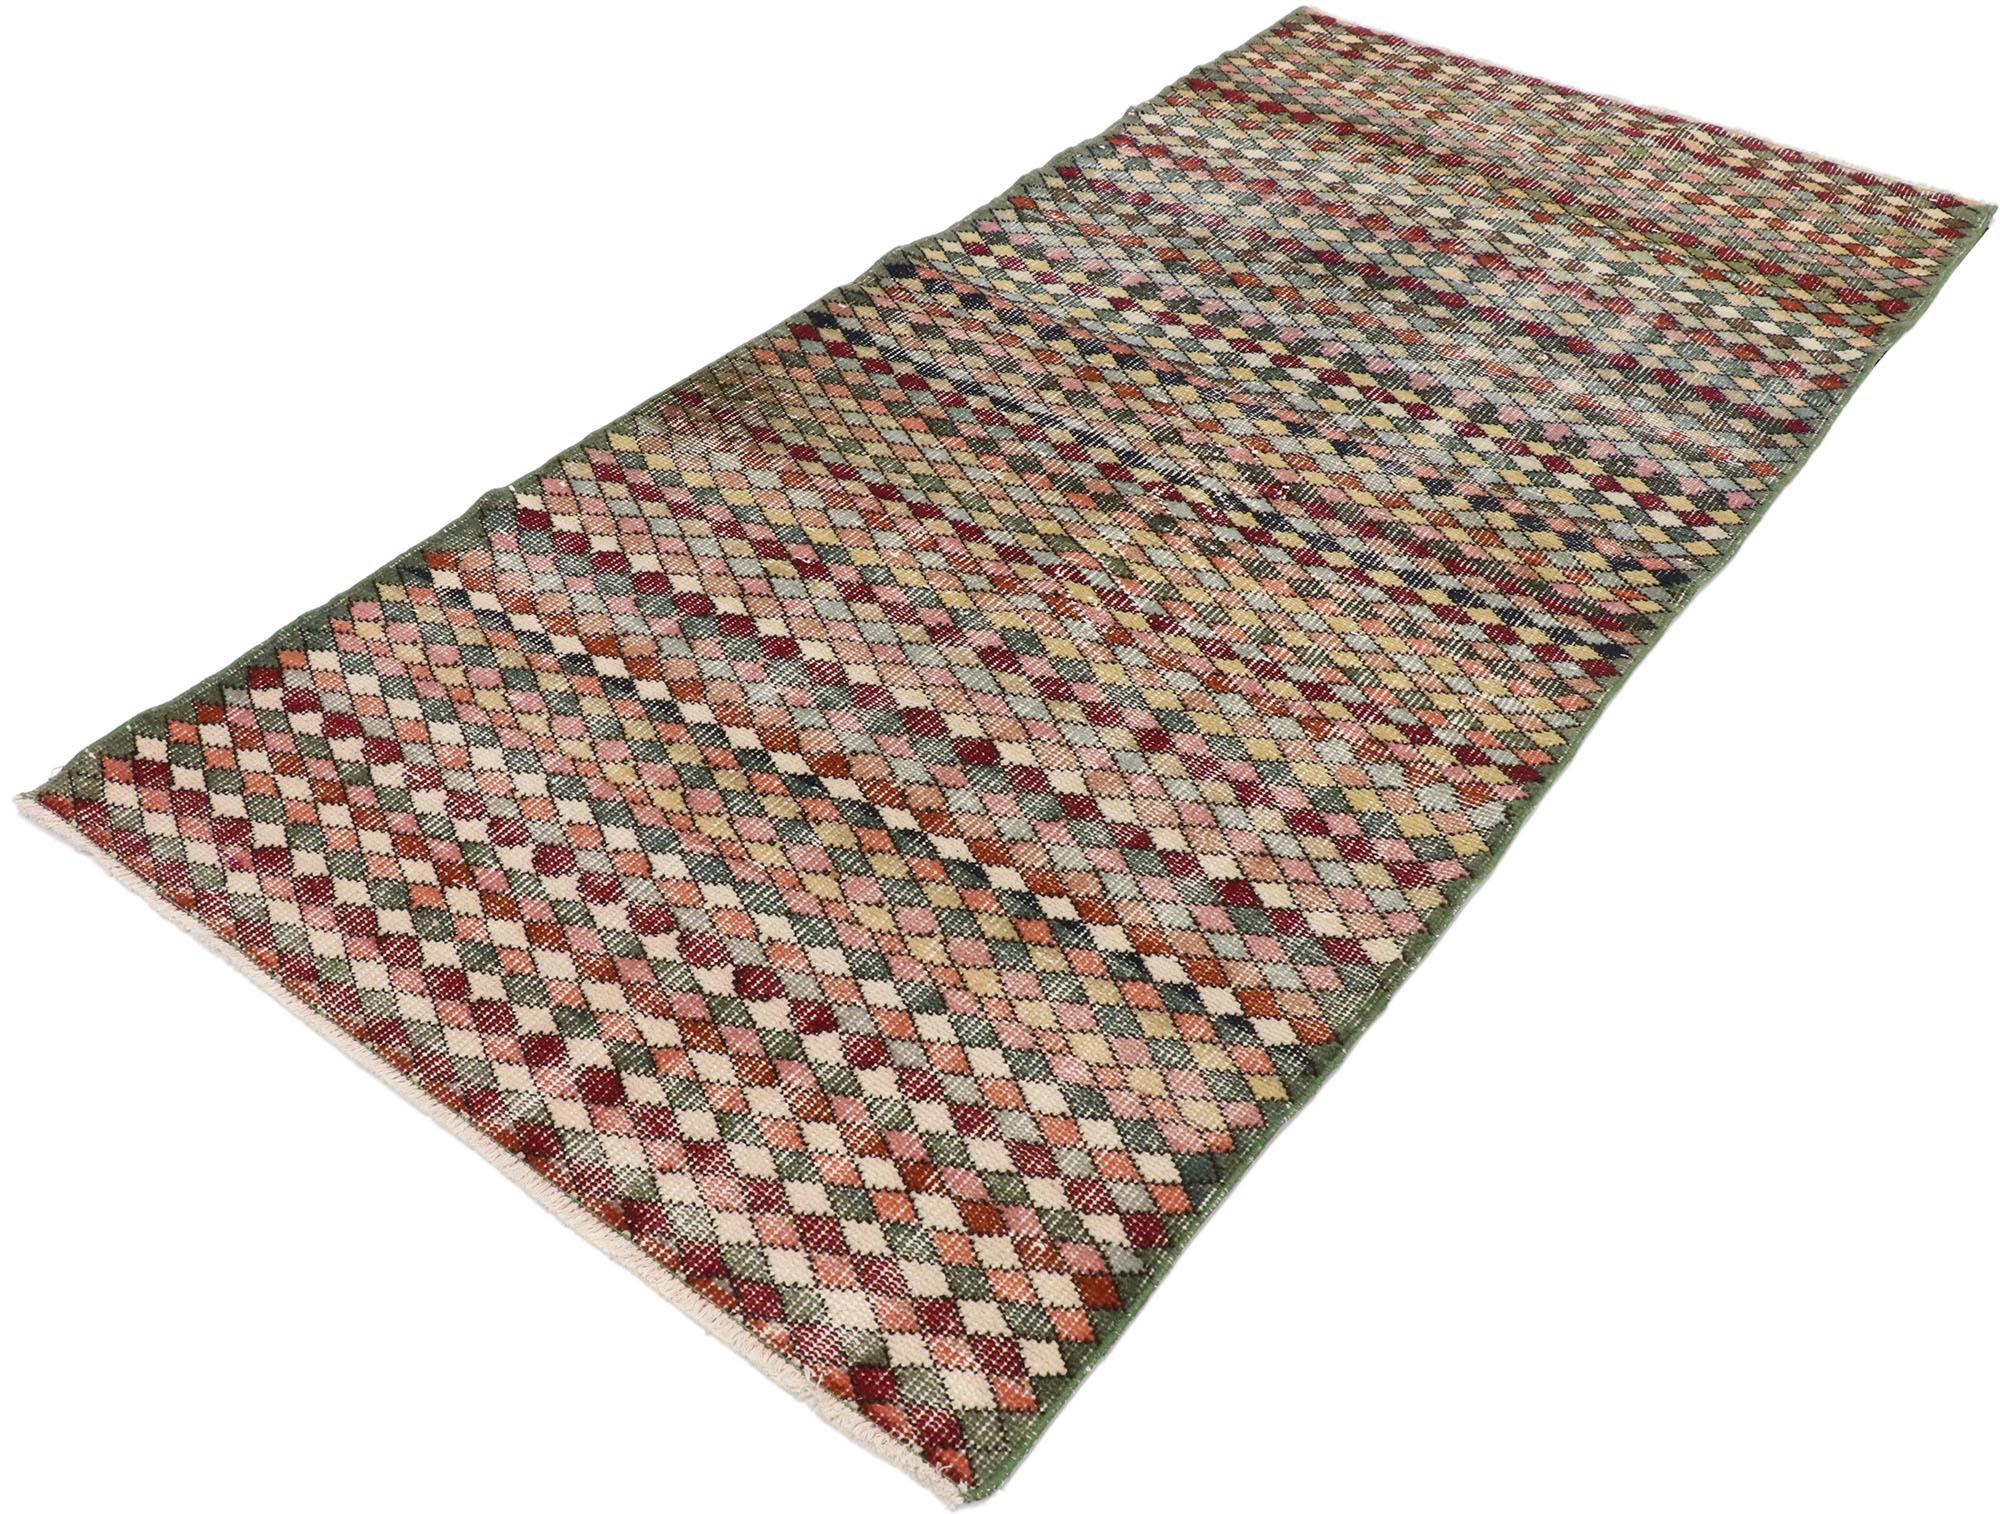 53371, distressed vintage Turkish Sivas rug with Rustic Mid-Century Modern style. This hand knotted wool distressed vintage Turkish Sivas rug features an all-over geometric pattern comprised of multicolored diamonds. Gentle waves of abrash and